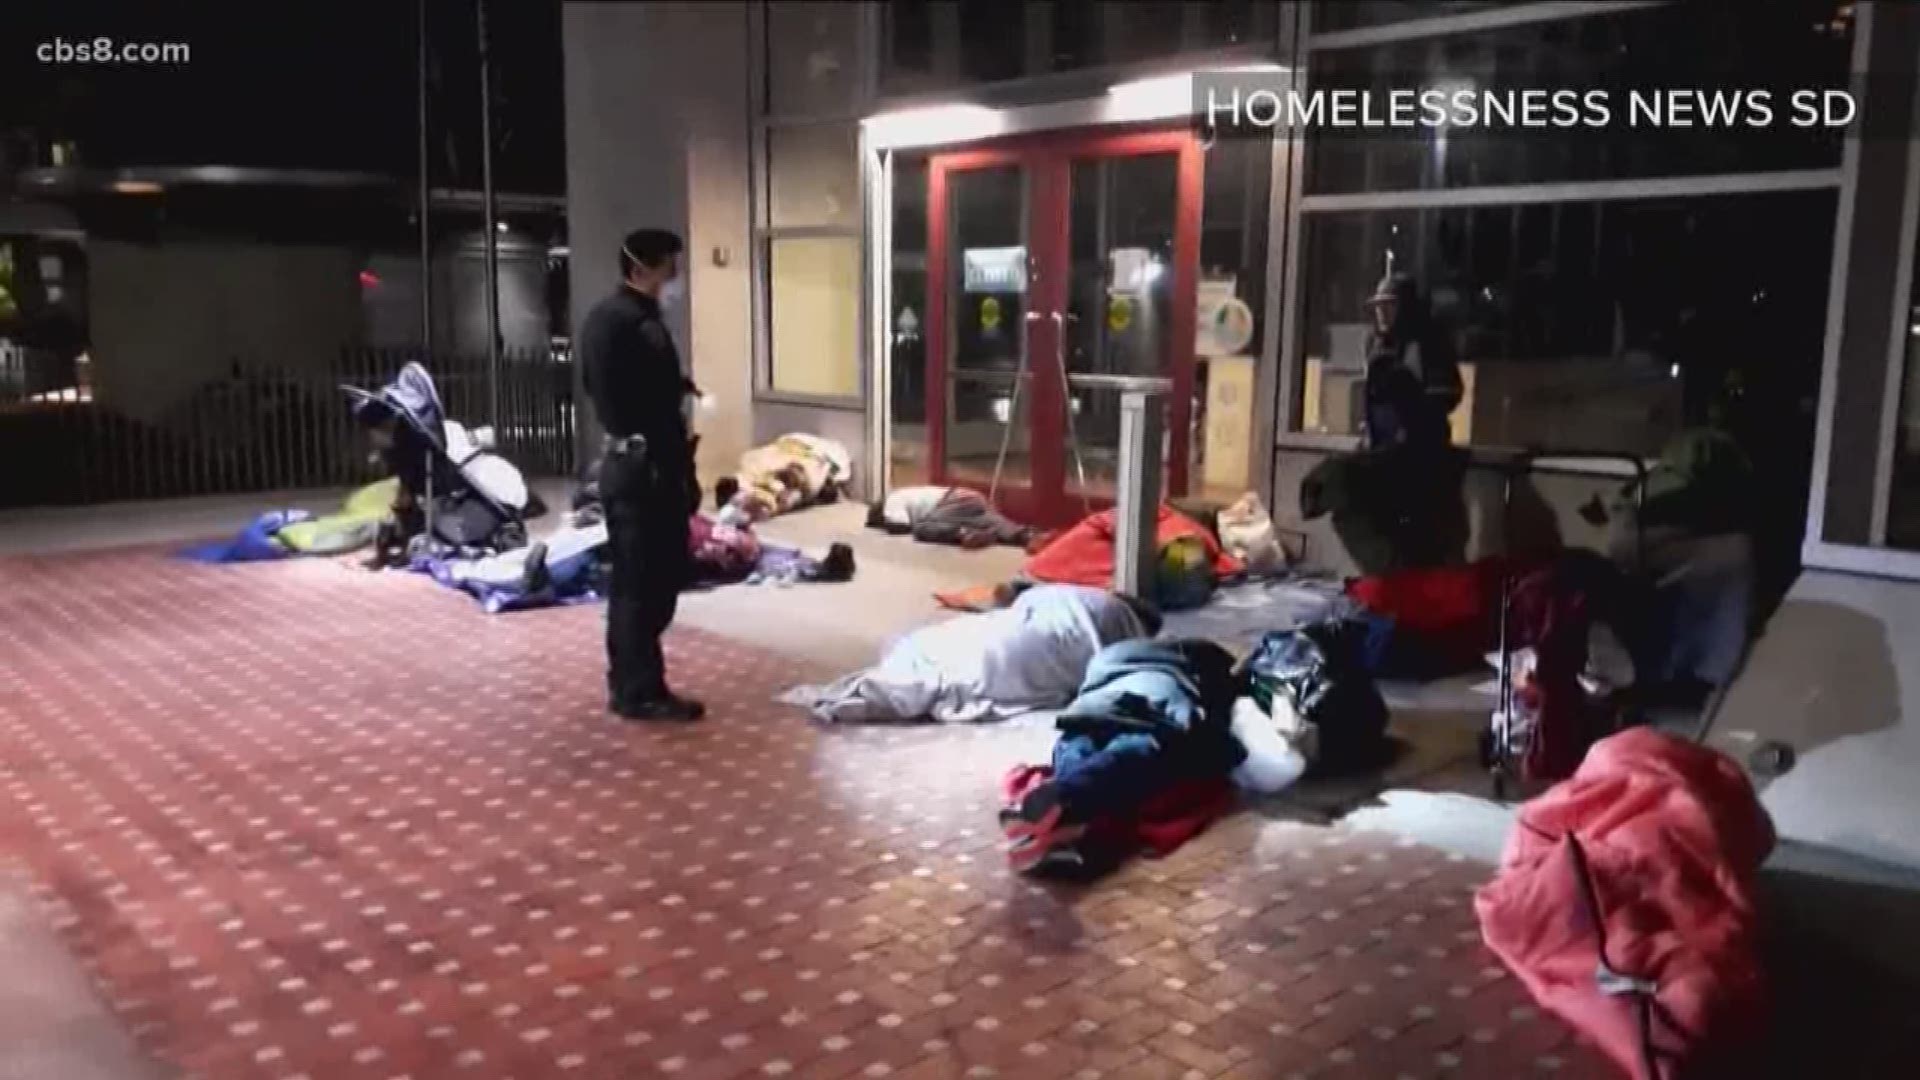 The convention center has opened up to house the homeless, but the majority of those in there were already living in shelters.